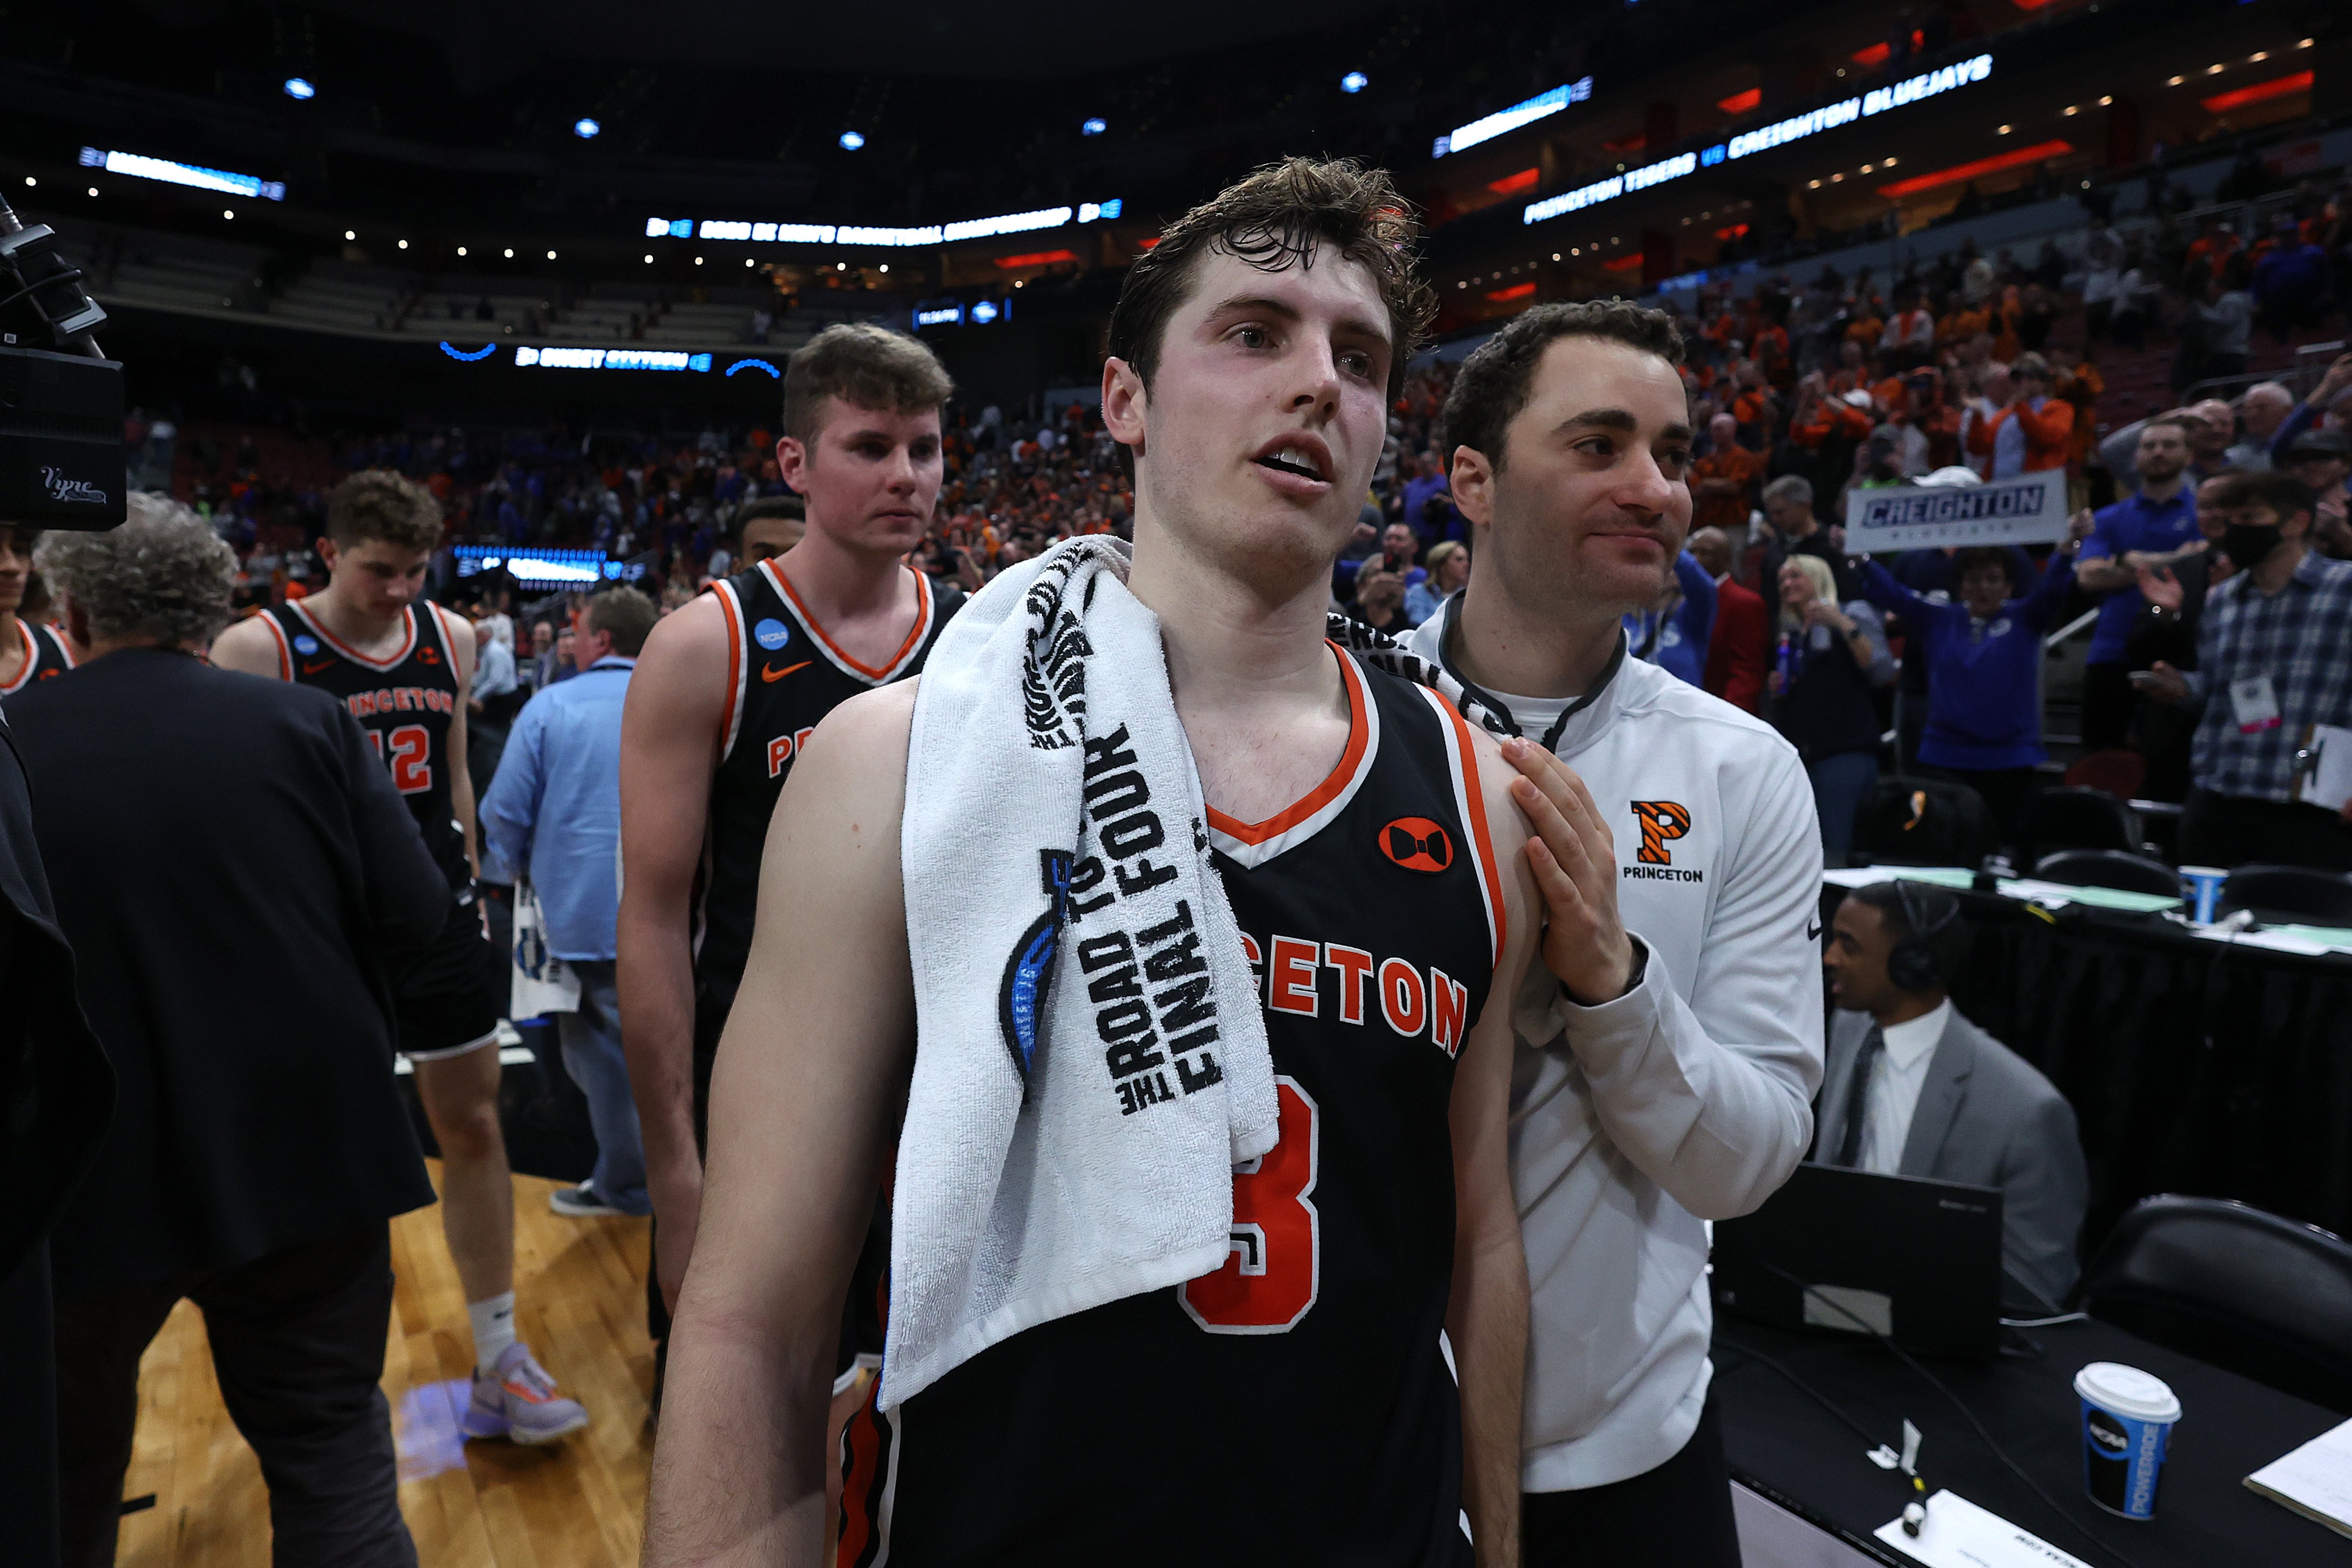 Ryan Langborg of the Princeton Tigers reacts after losing to the Creighton Bluejays in the Sweet 16 round of the NCAA Men's Basketball Tournament at KFC YUM! Center on March 24, 2023, in Louisville, Ky. (Rob Carr&mdash;2023 Getty Images) (Getty Images&mdash;2023 Getty Images)